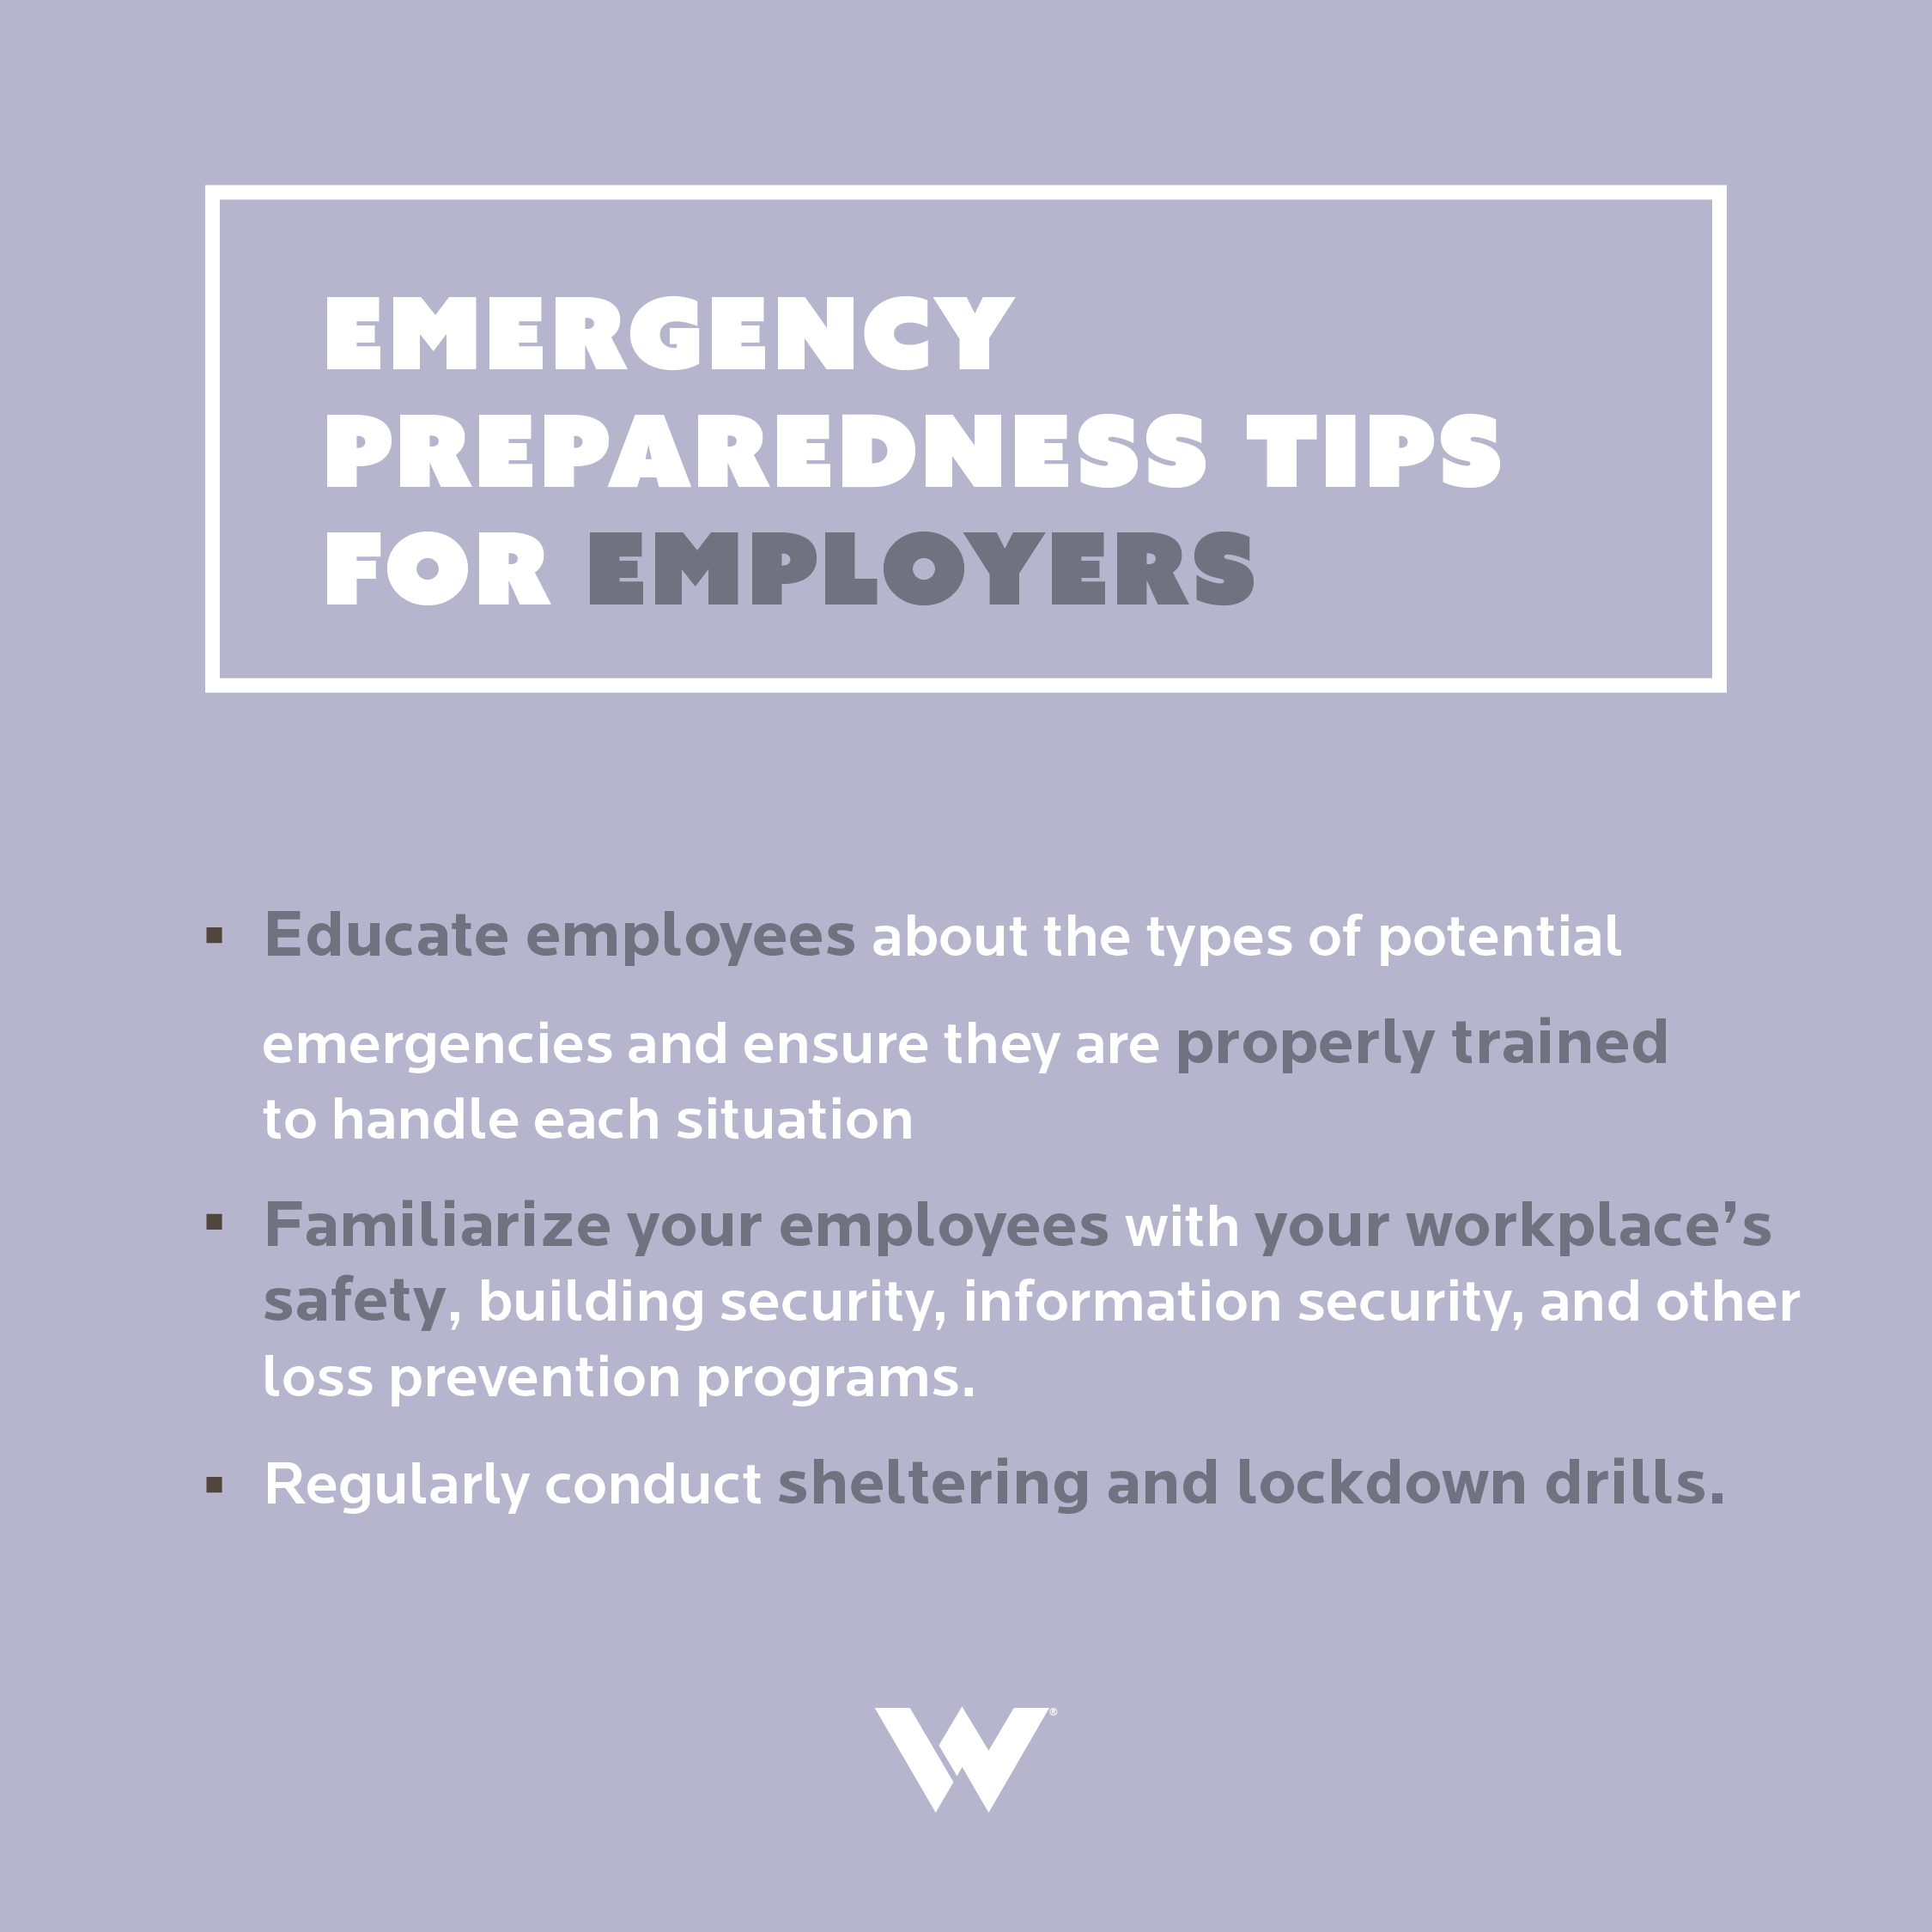 A social media graphic with disaster preparedness tips for employers.